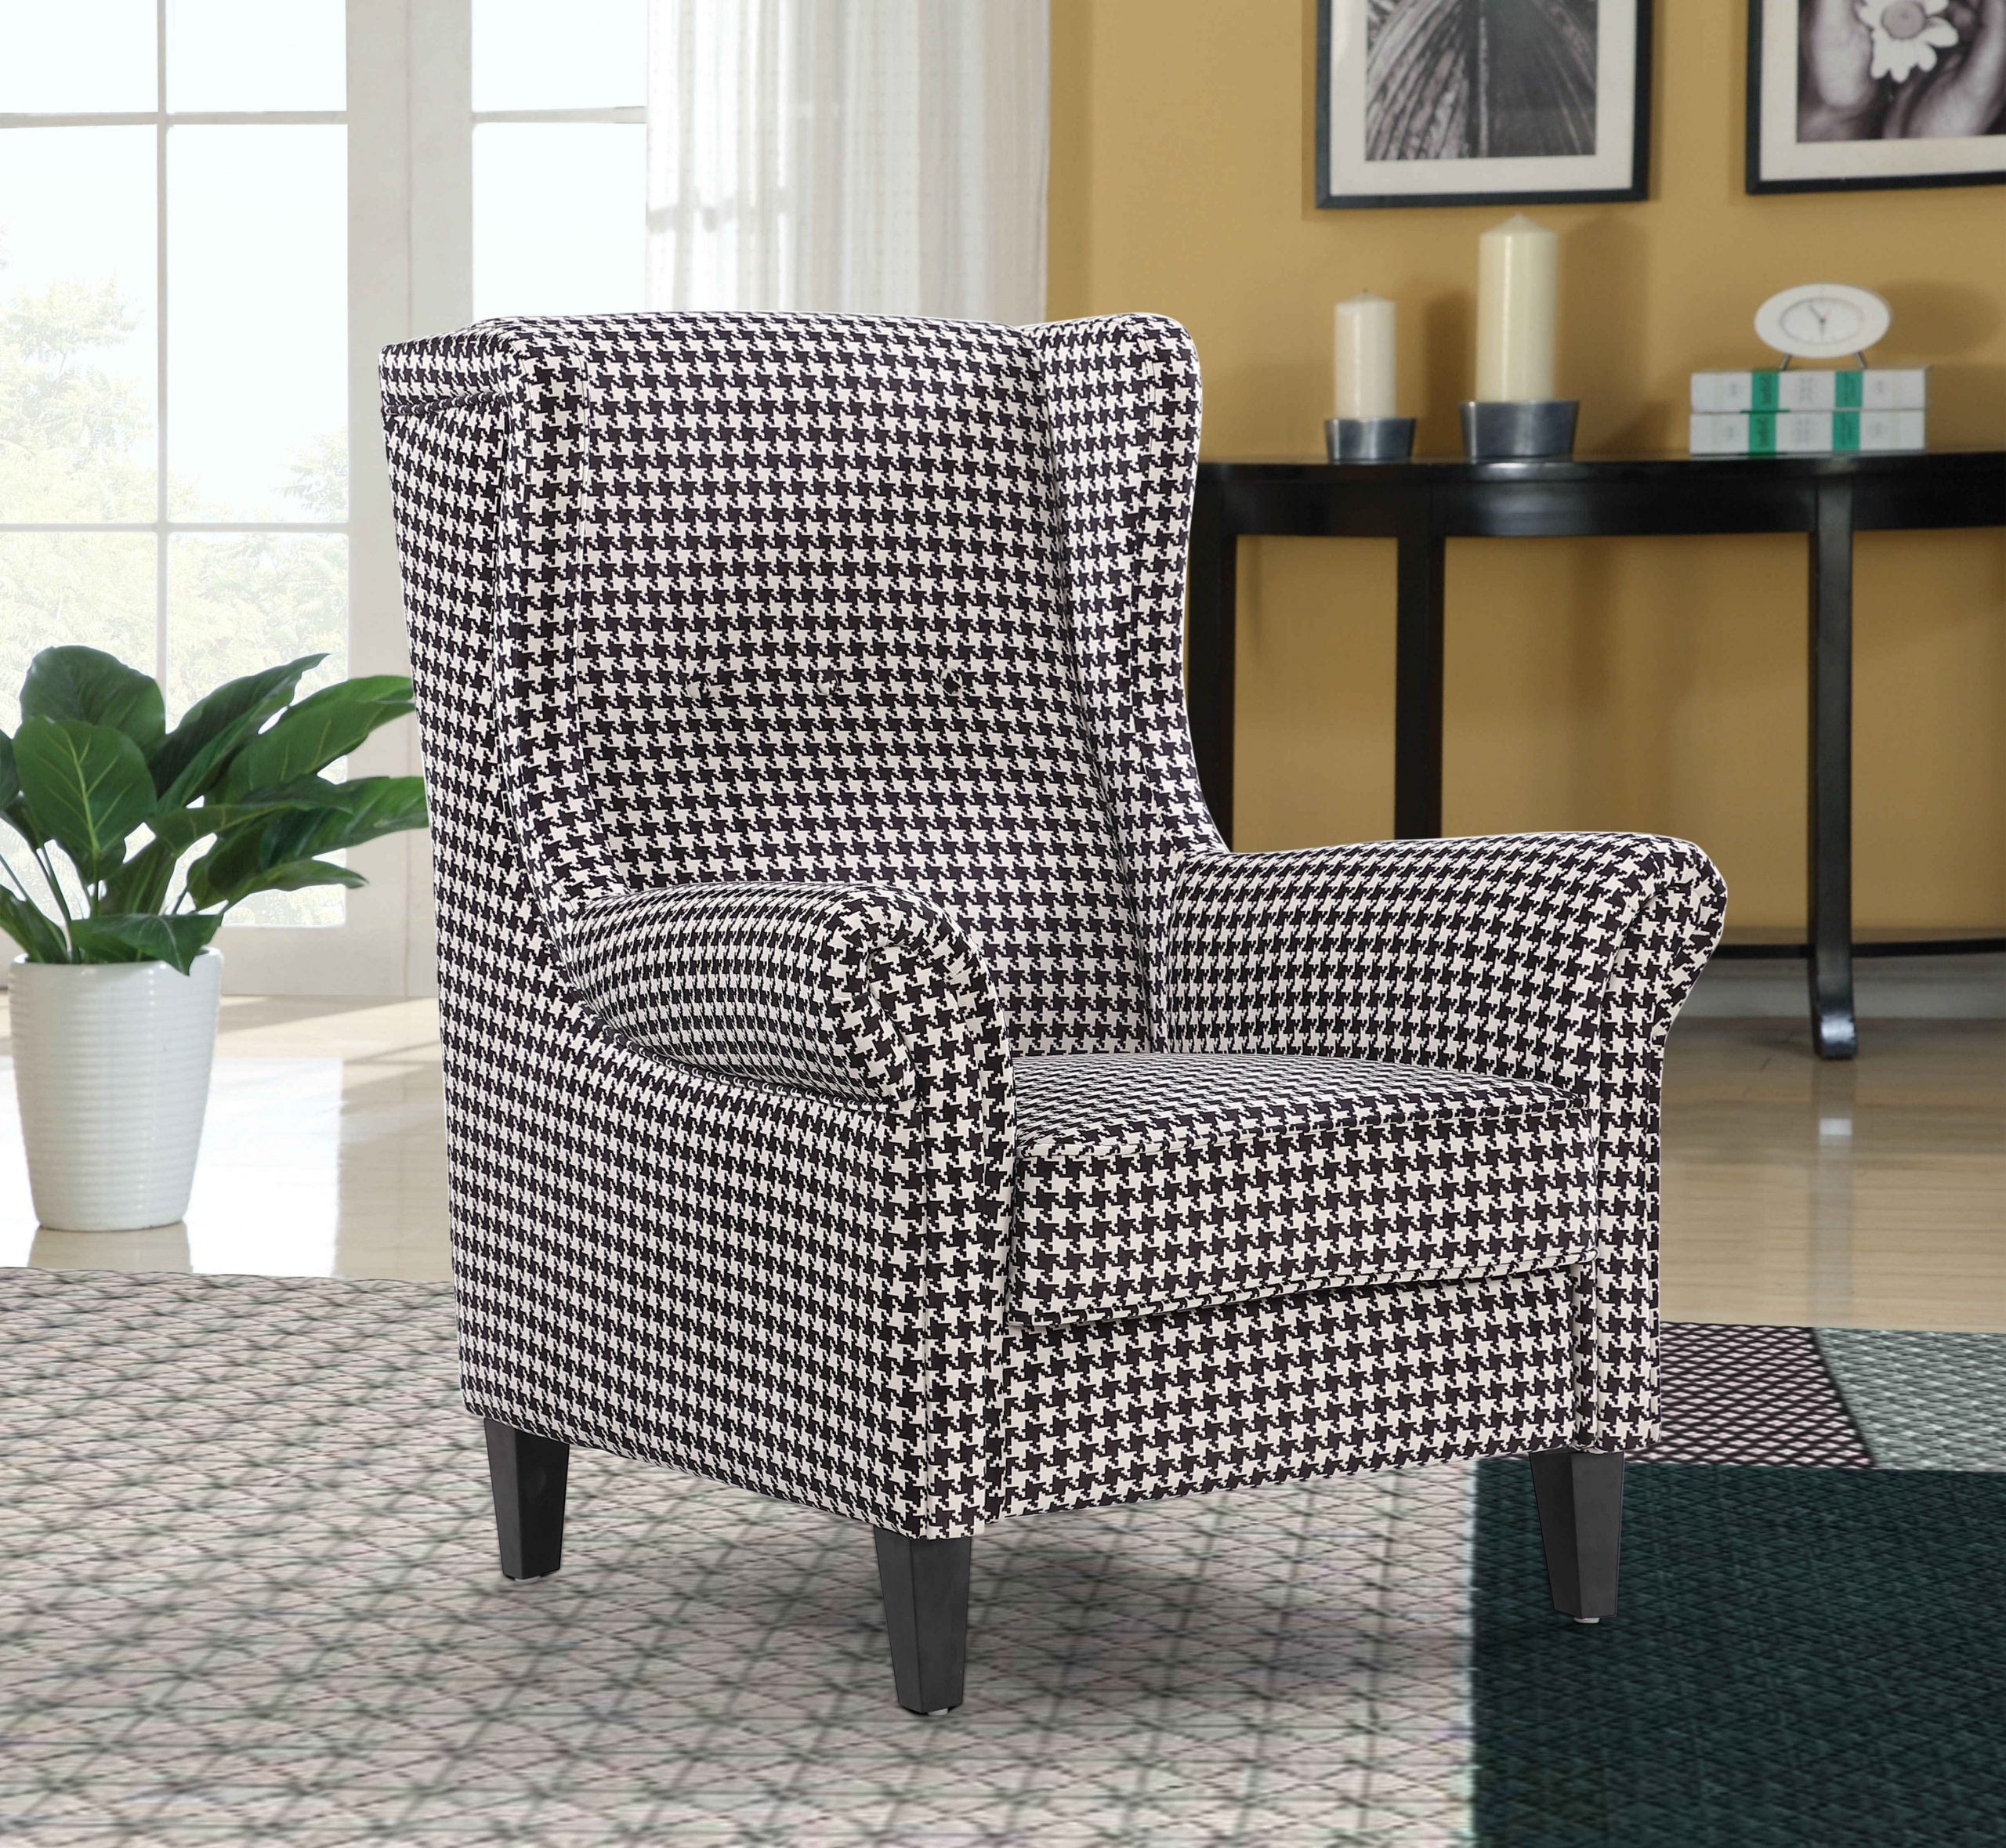 BT Bliss Wing Chair Upholstered in Houndstooth Fabric